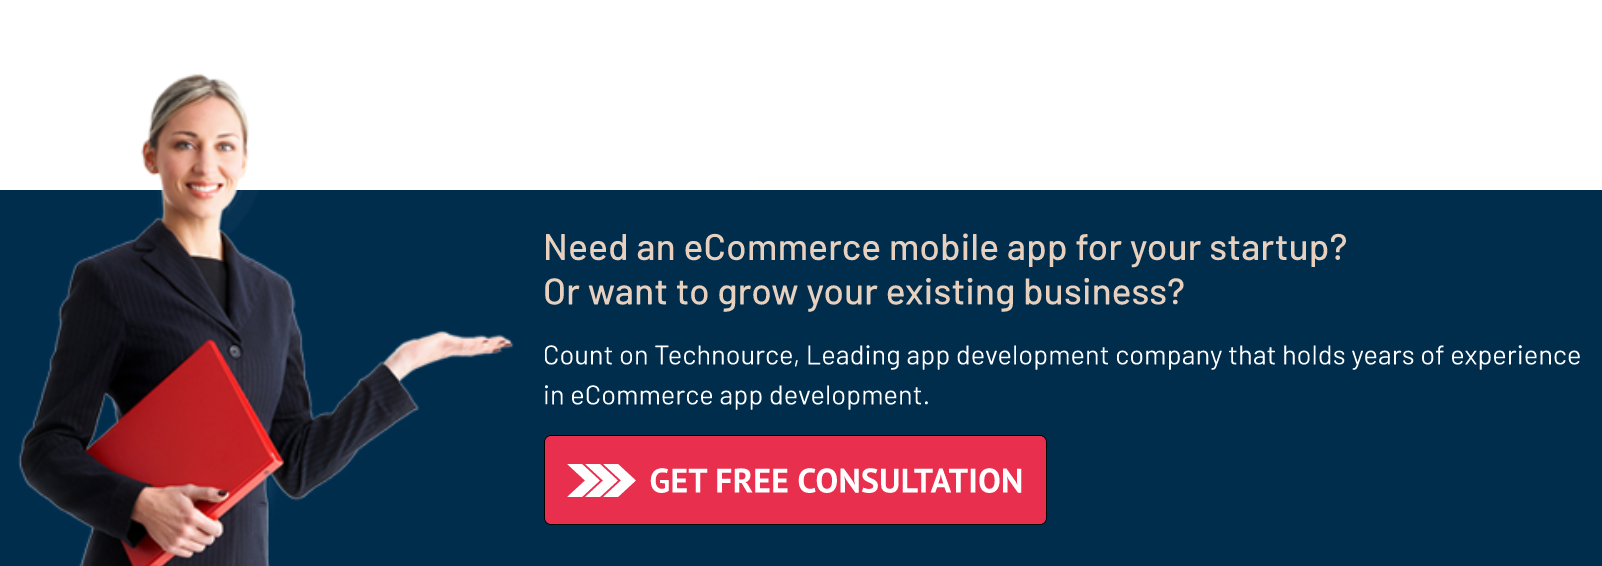 Need-an-eCommerce-mobile-app-for-your-startup-CTA